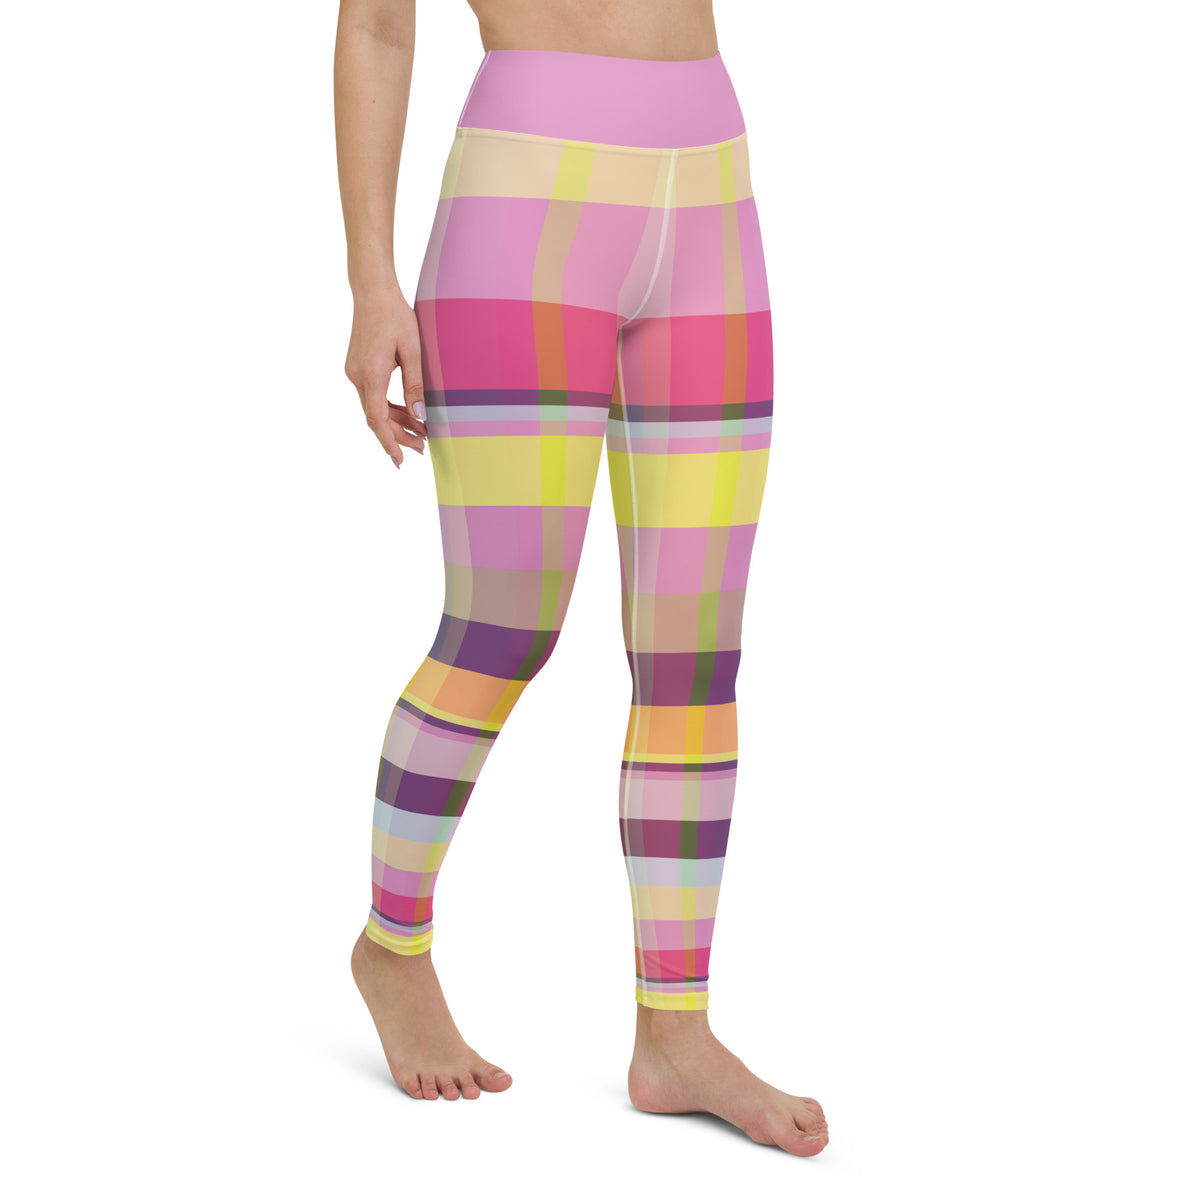 Explore the cosmos in style with the Galactic Spectrum Yoga Leggings, featuring a stunning space-inspired design.